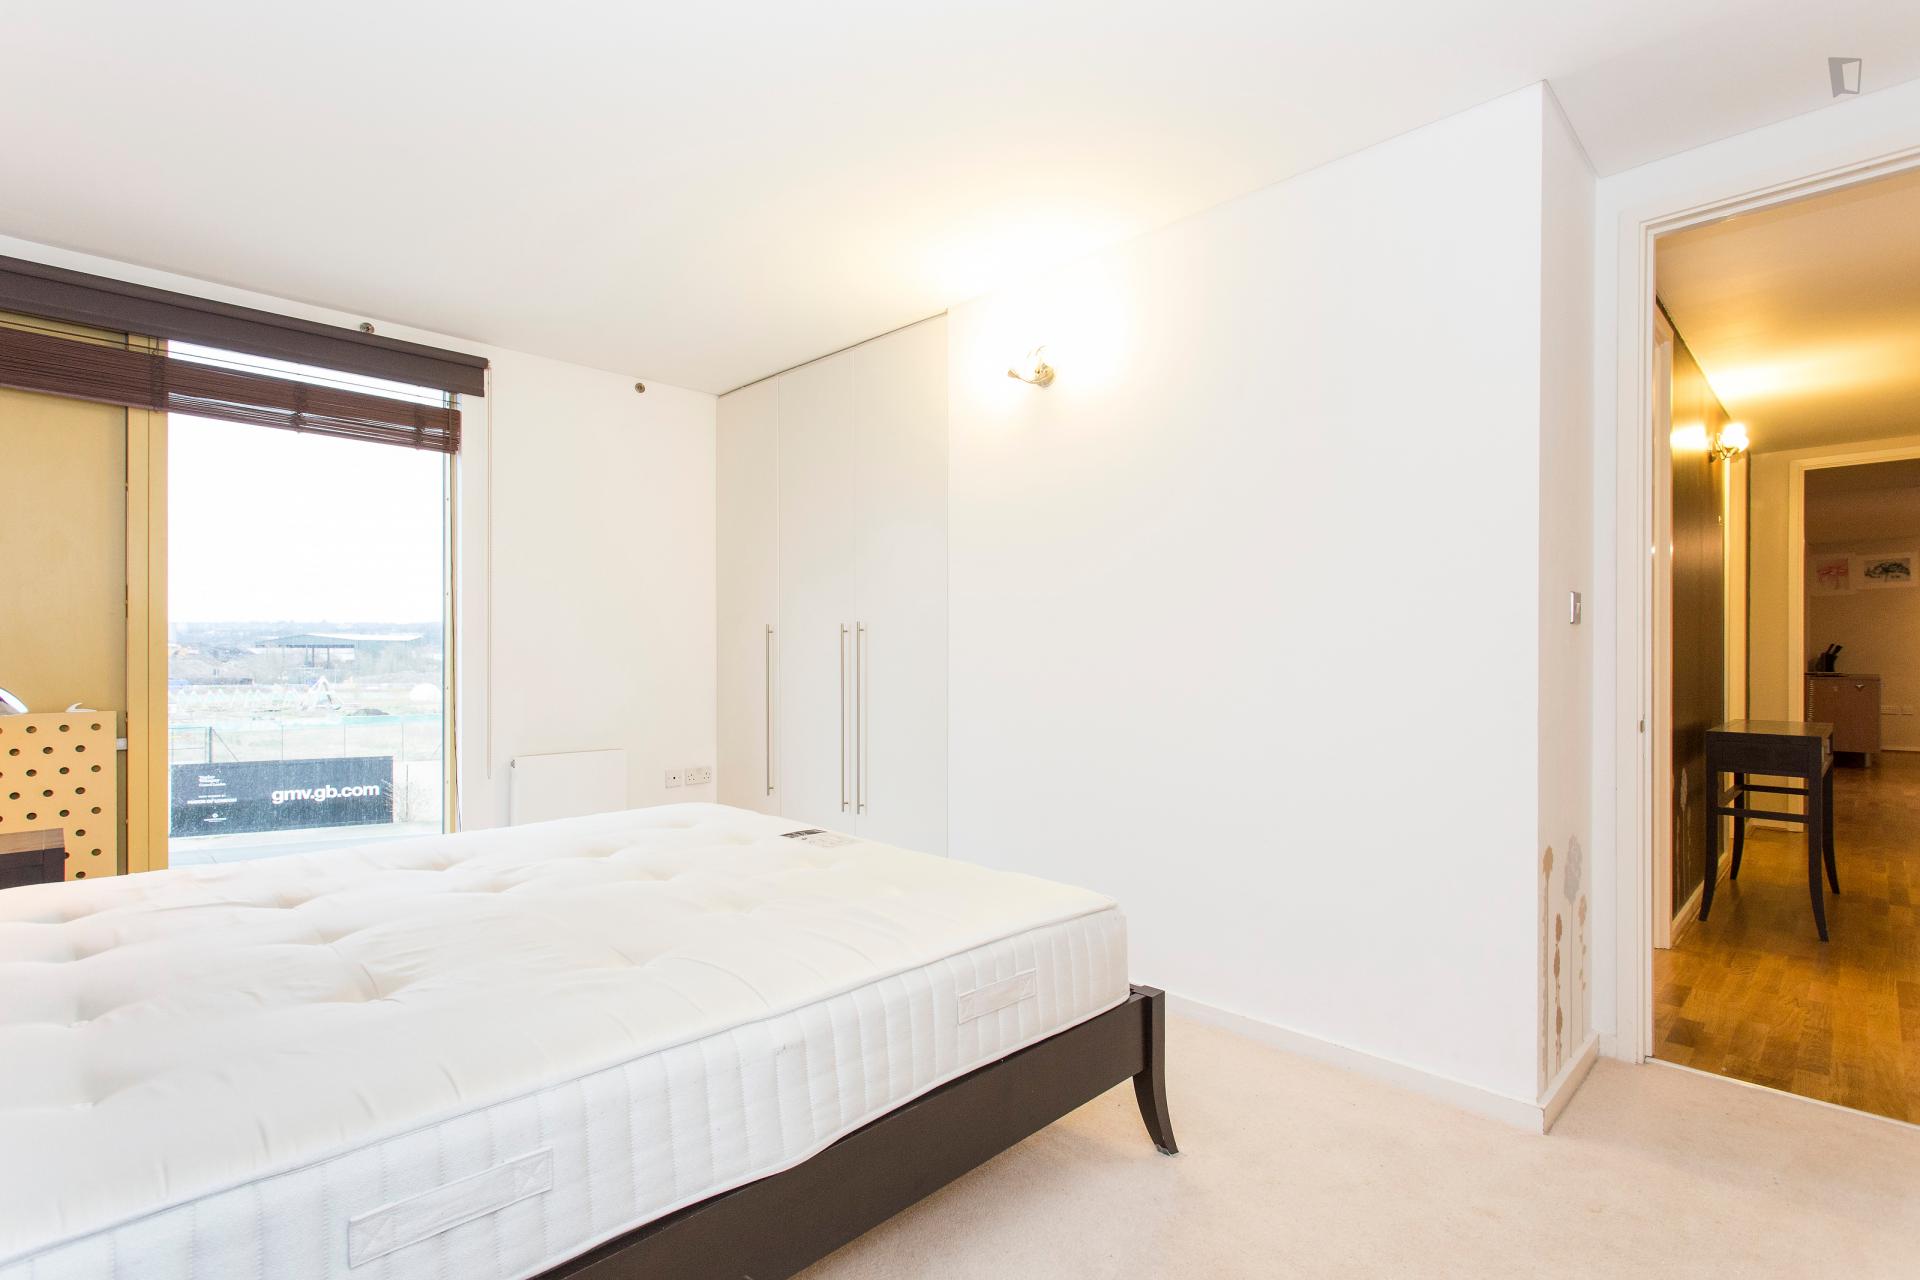 Court - Expat room in London apartment